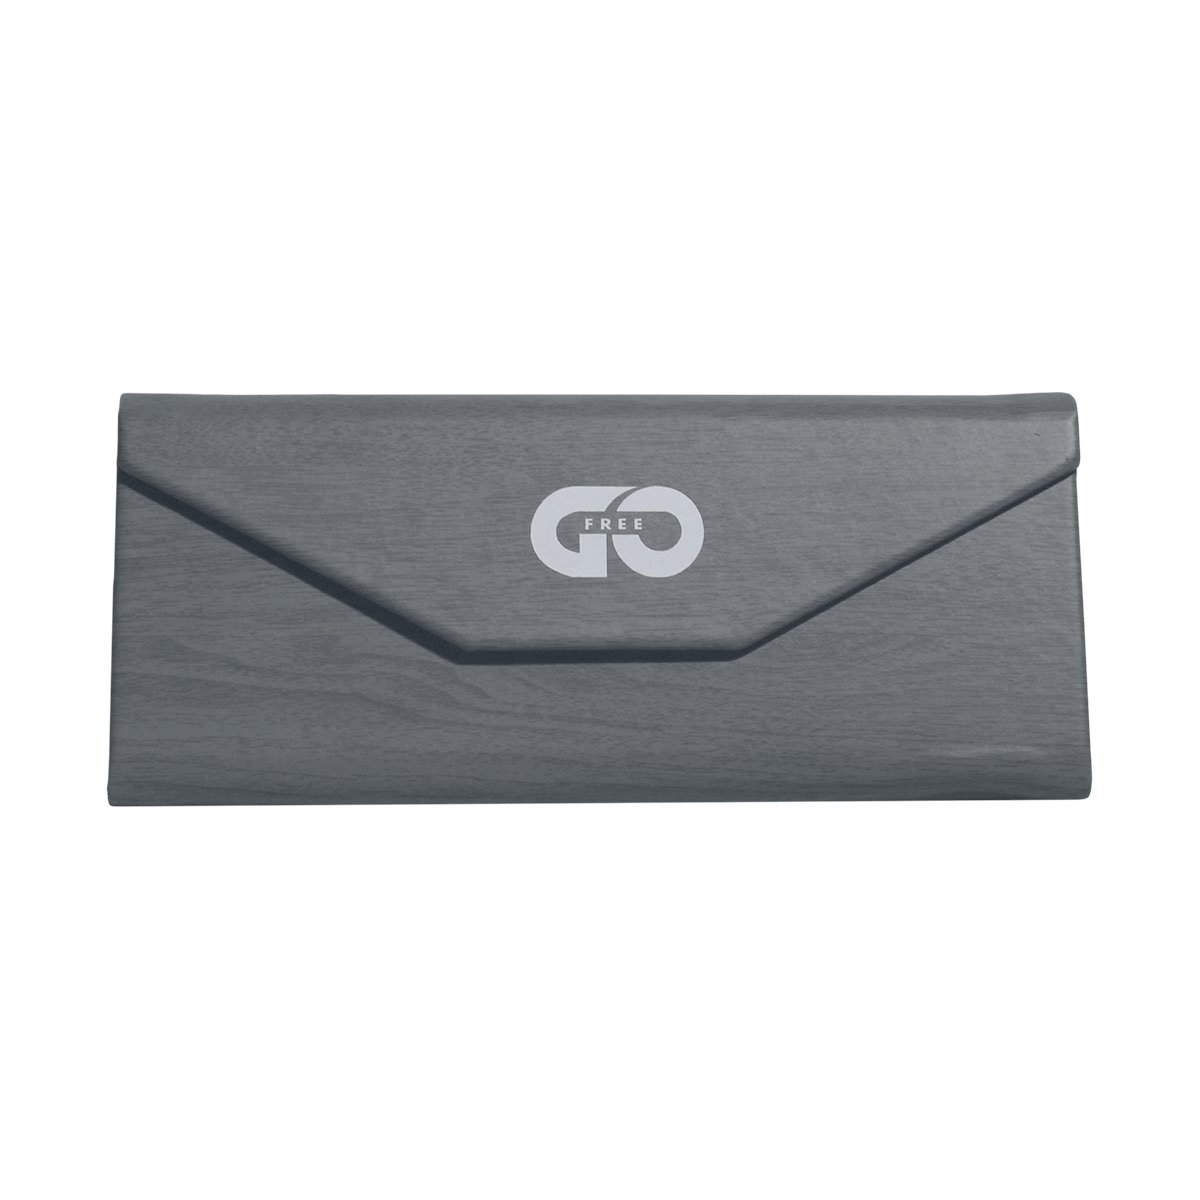 GOFREE Classic Unisex Leatherite (FOLDING) Case for Glasses With One Spectacle Cleaning Cloth     GREY COVR-03